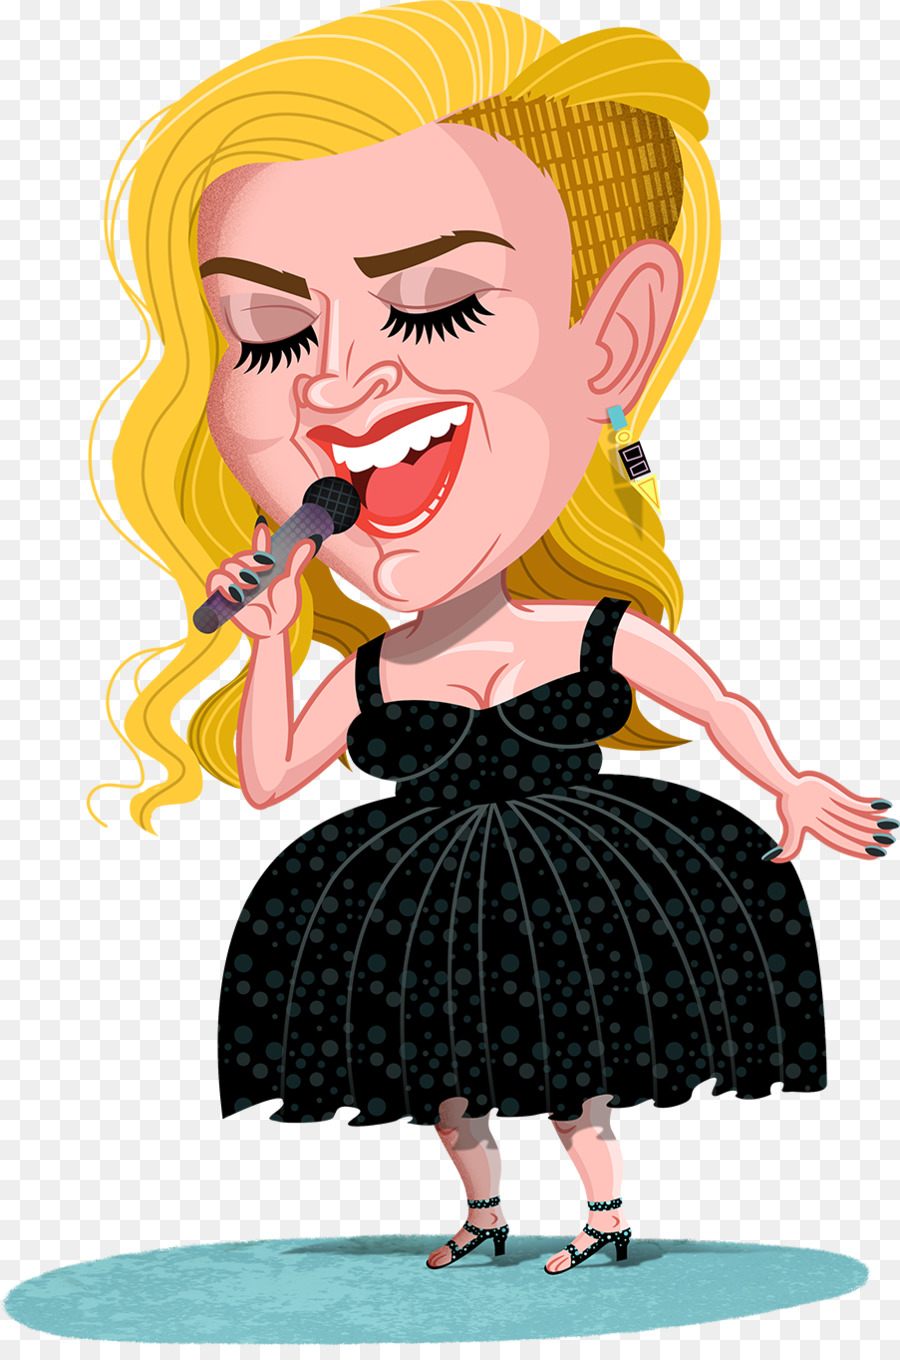 Kelly Clarkson PNG Clipart